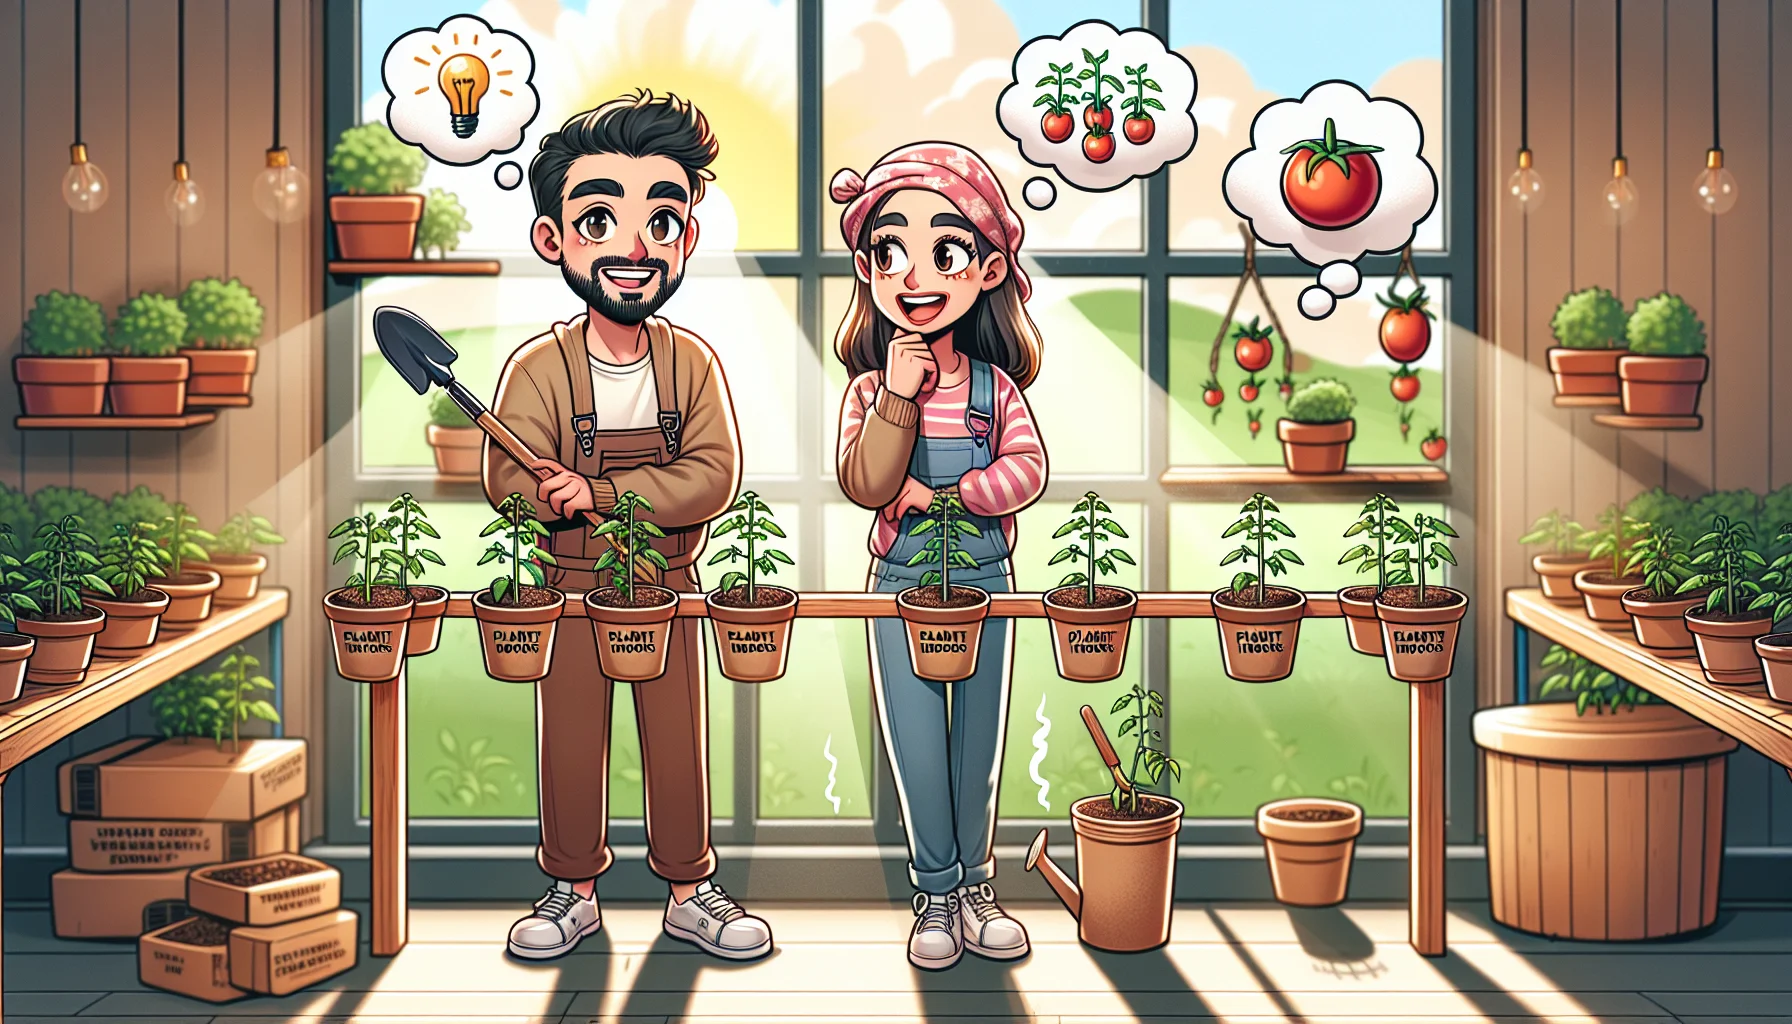 Imagine an amusing and engaging scenario that invites people to engage in gardening. In the scene, you'll see a Caucasian man and a Middle-Eastern woman, both with a big smile on their face, standing in their indoor garden. Landscape is filled with hanging pots of tiny sprouting tomato plants with miniature hallmarks indicating 'Plant tomatoes indoors'. The sun shines brightly through the window, creating a warm ambiance. They each have a gardening tool in hand, and cartoon thought bubbles showing tomato plants in different growing stages. This setting provides a realistic visual guide to when one should plant tomato seeds indoors.